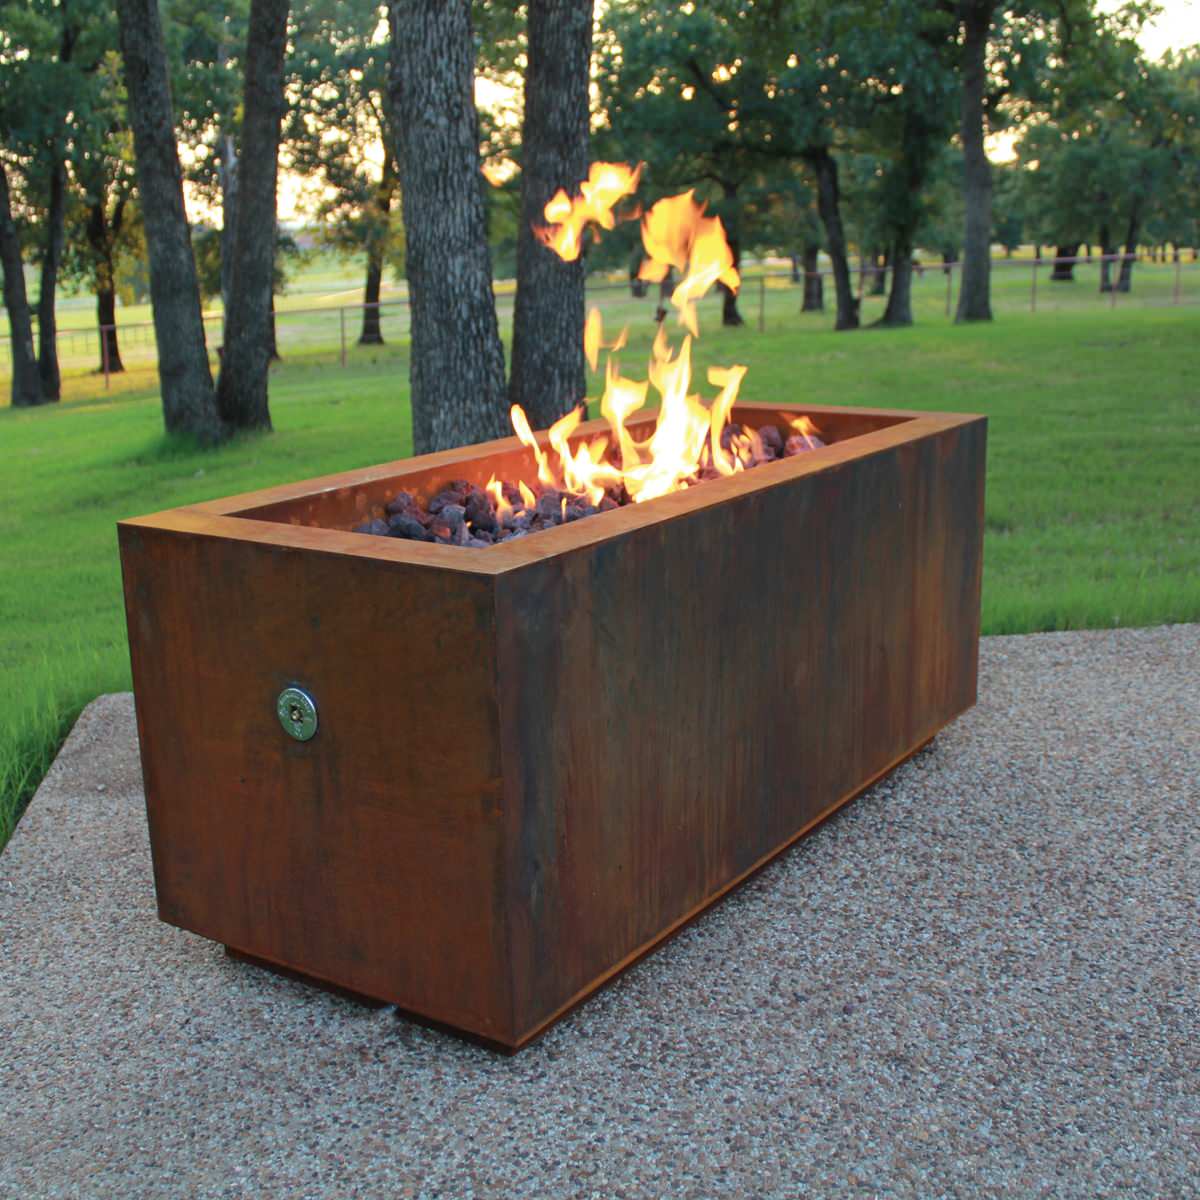 Propane Tank Fire Pit Ideas, Round Fire Pit With Propane Tank Inside